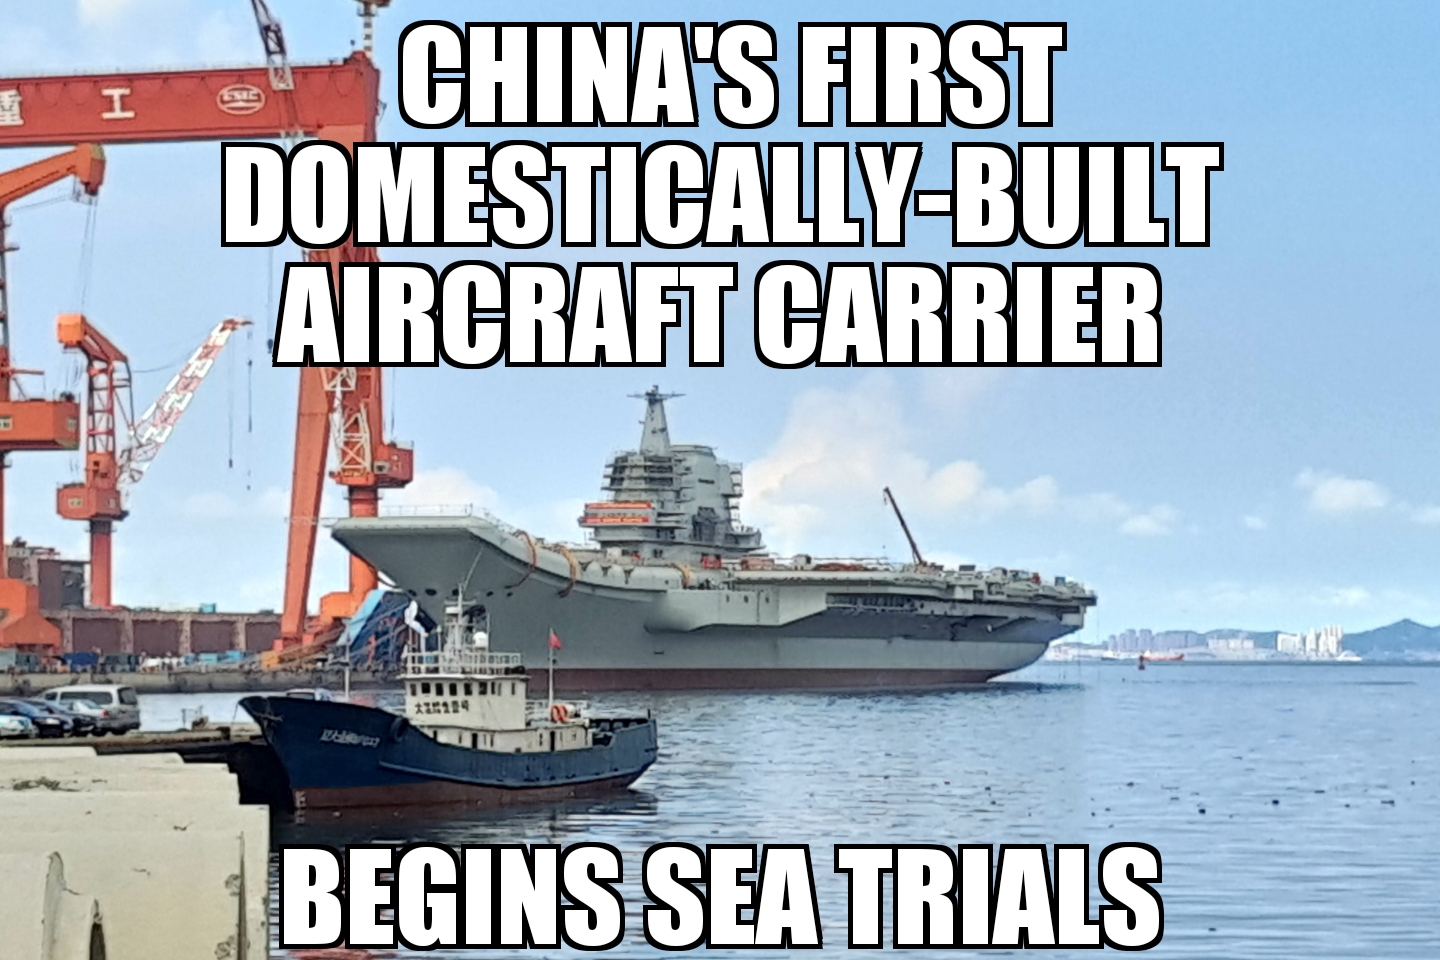 China’s aircraft carrier begins sea trials